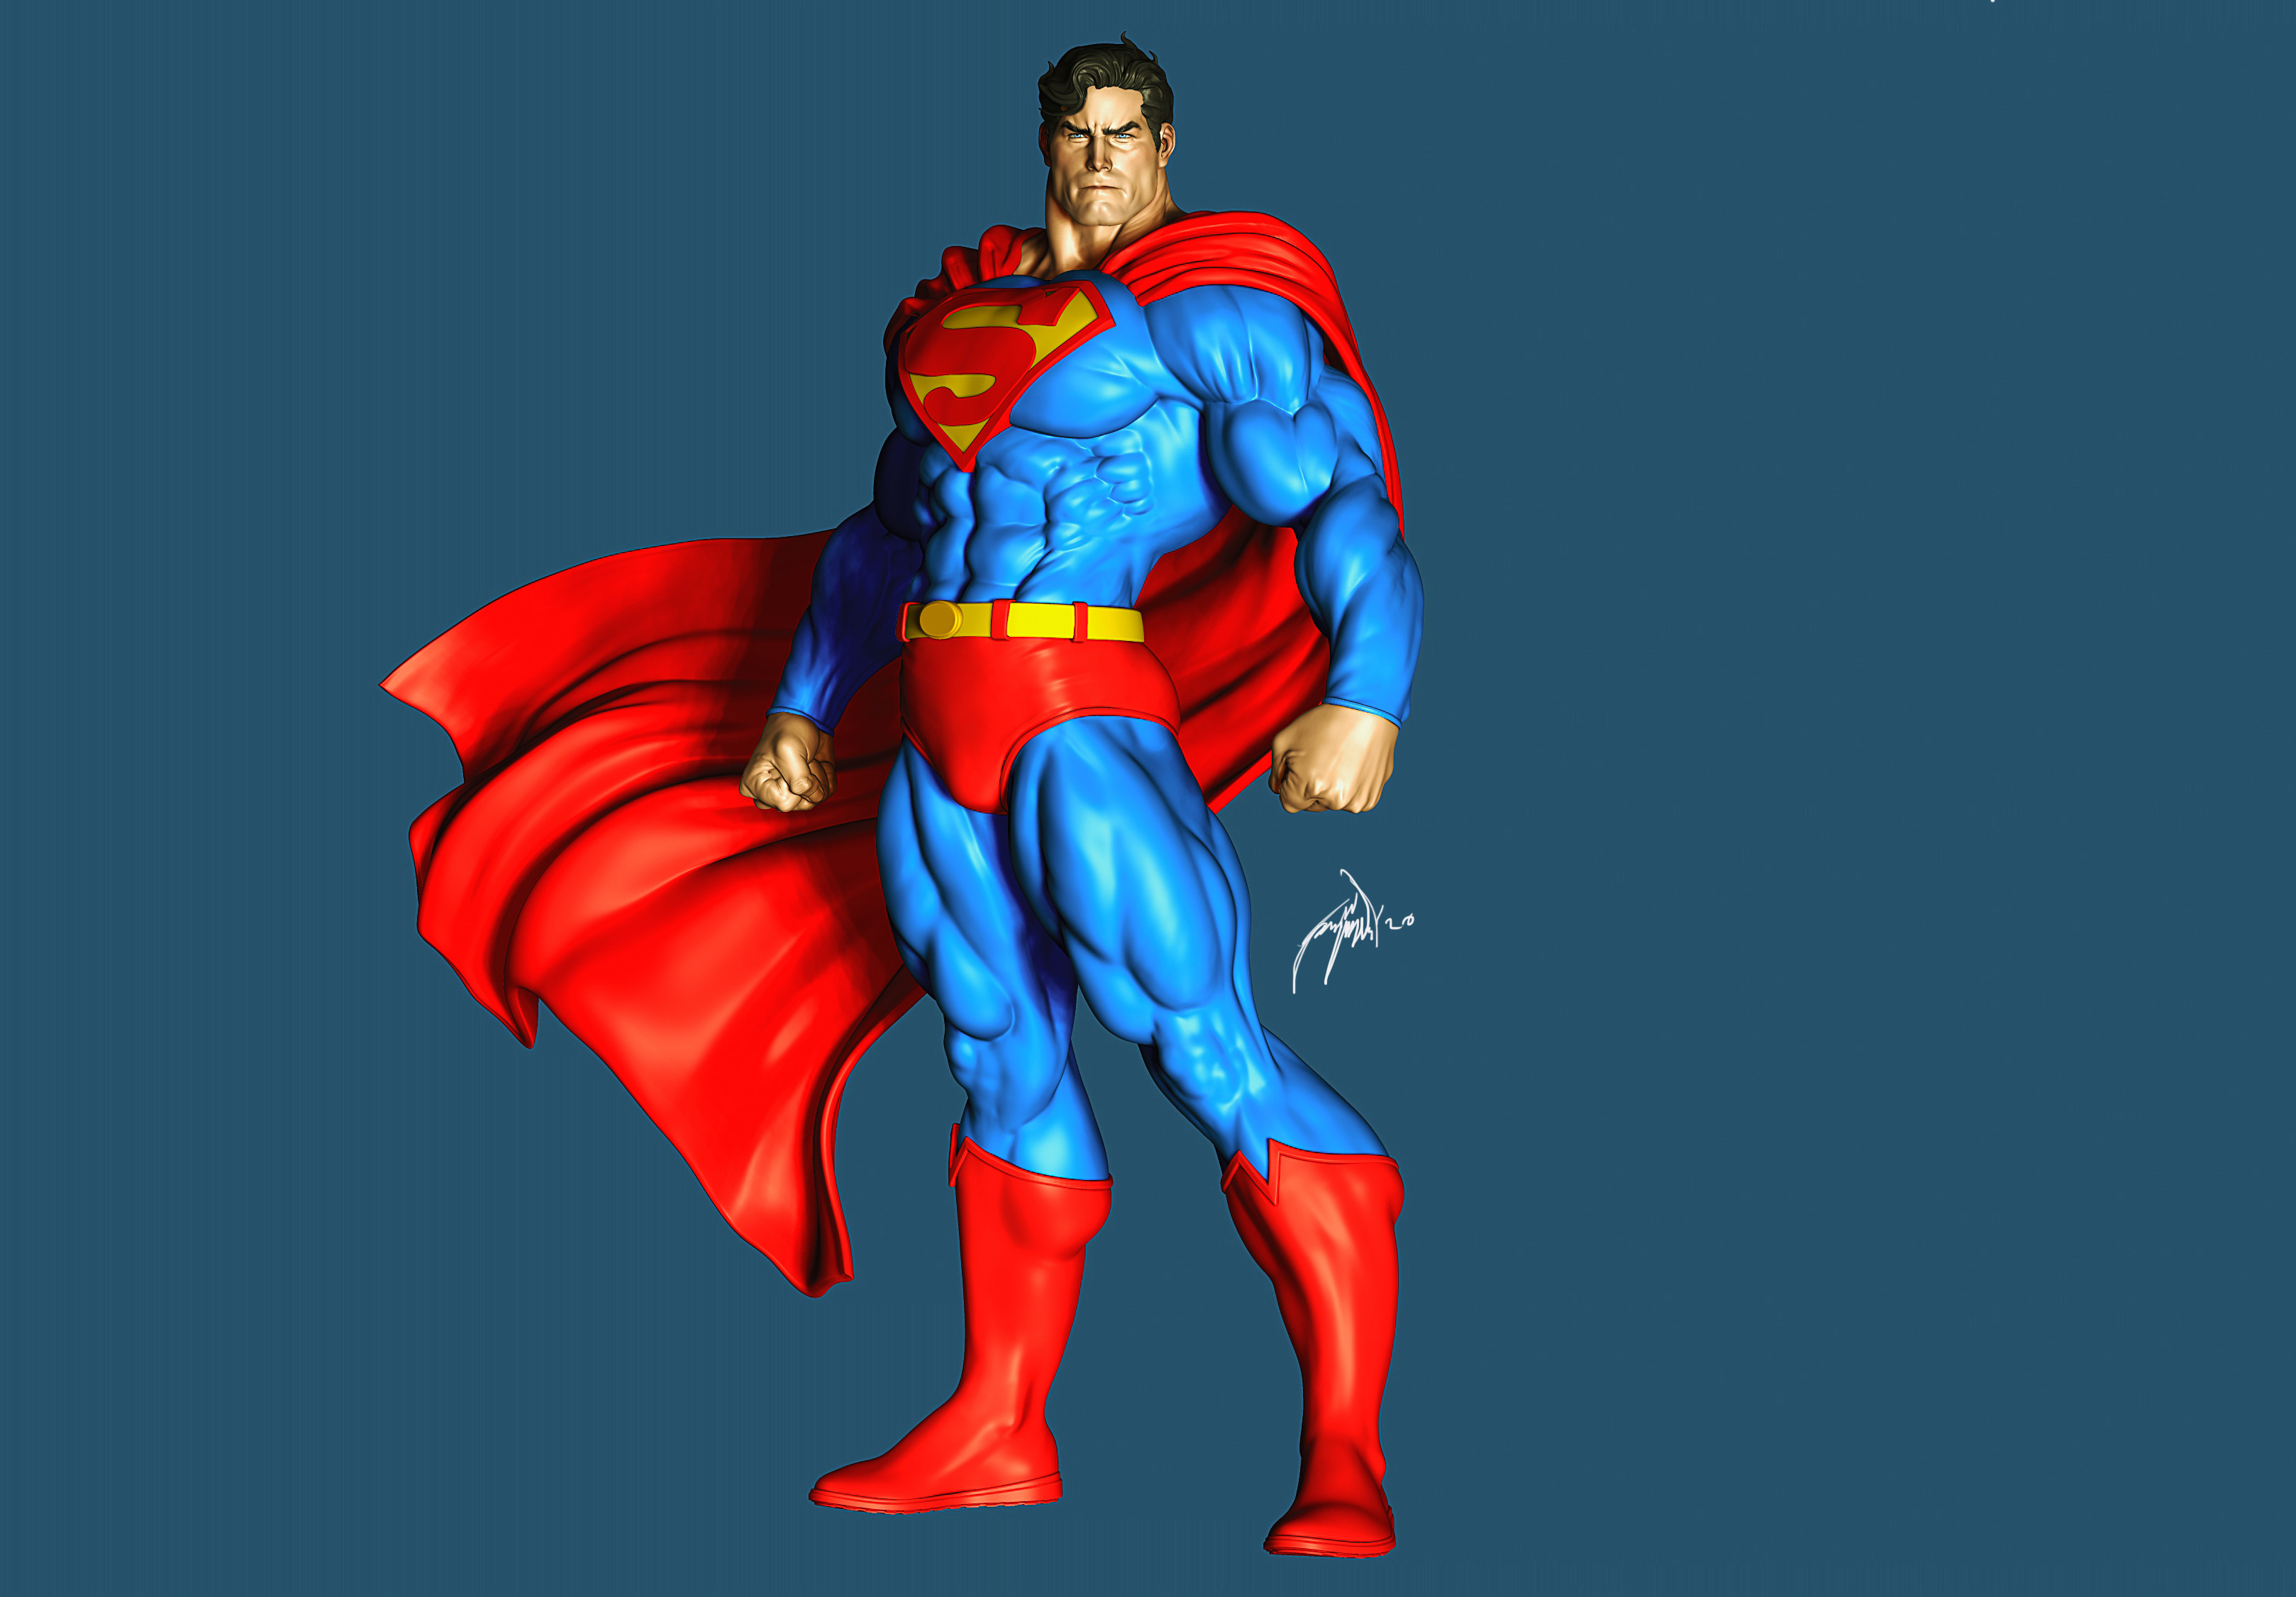 Download Superhero, Superman, keeps the peace in this flying pose |  Wallpapers.com